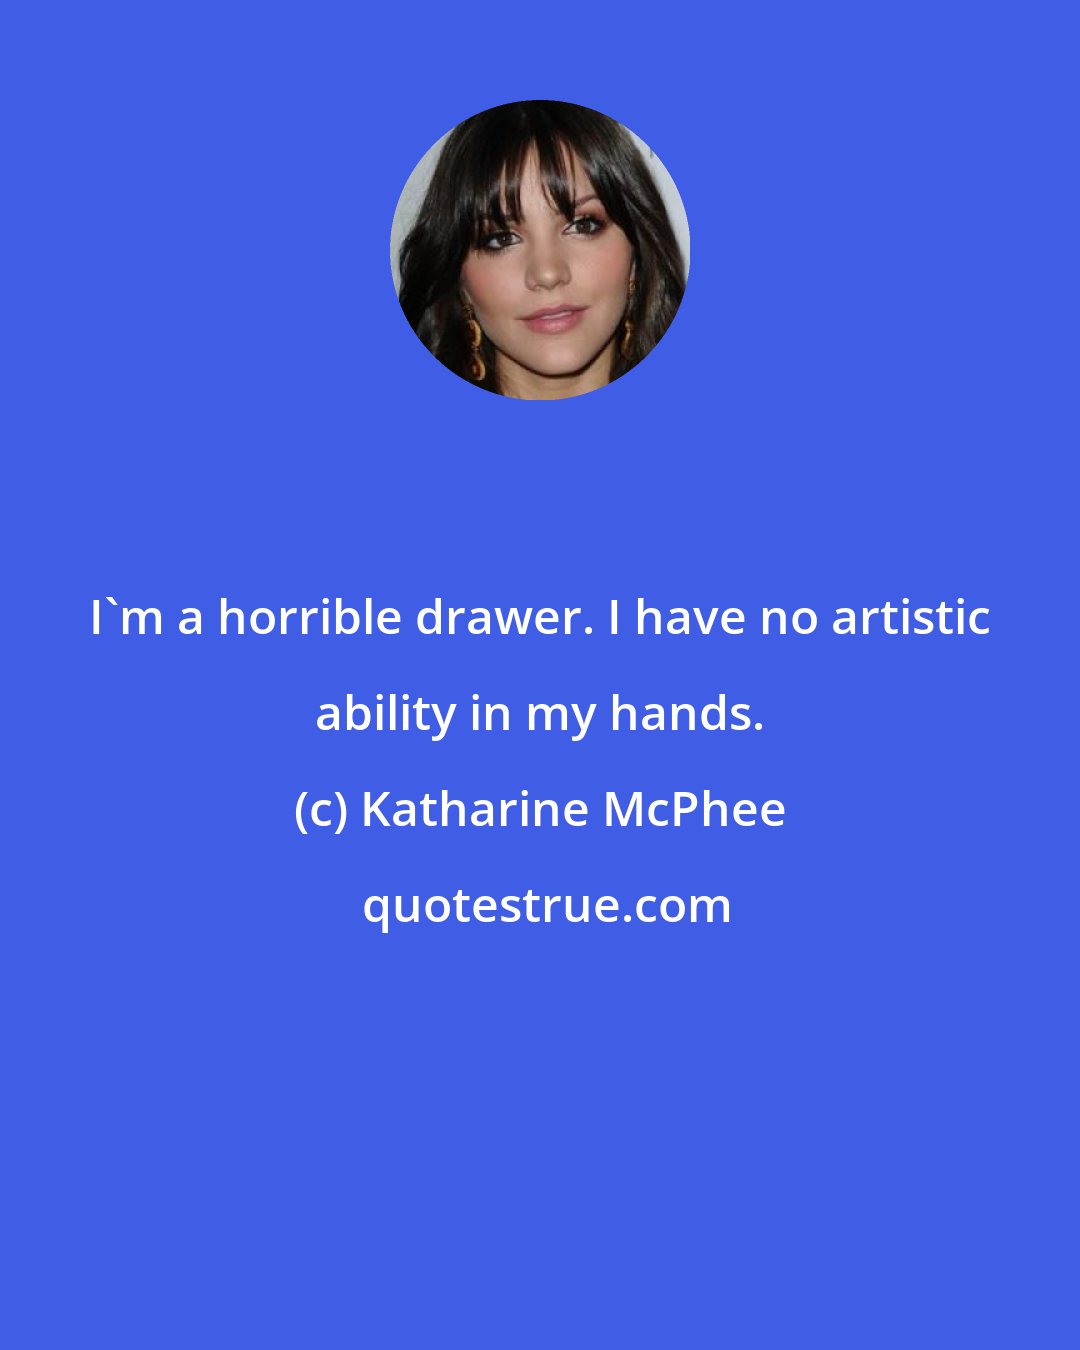 Katharine McPhee: I'm a horrible drawer. I have no artistic ability in my hands.